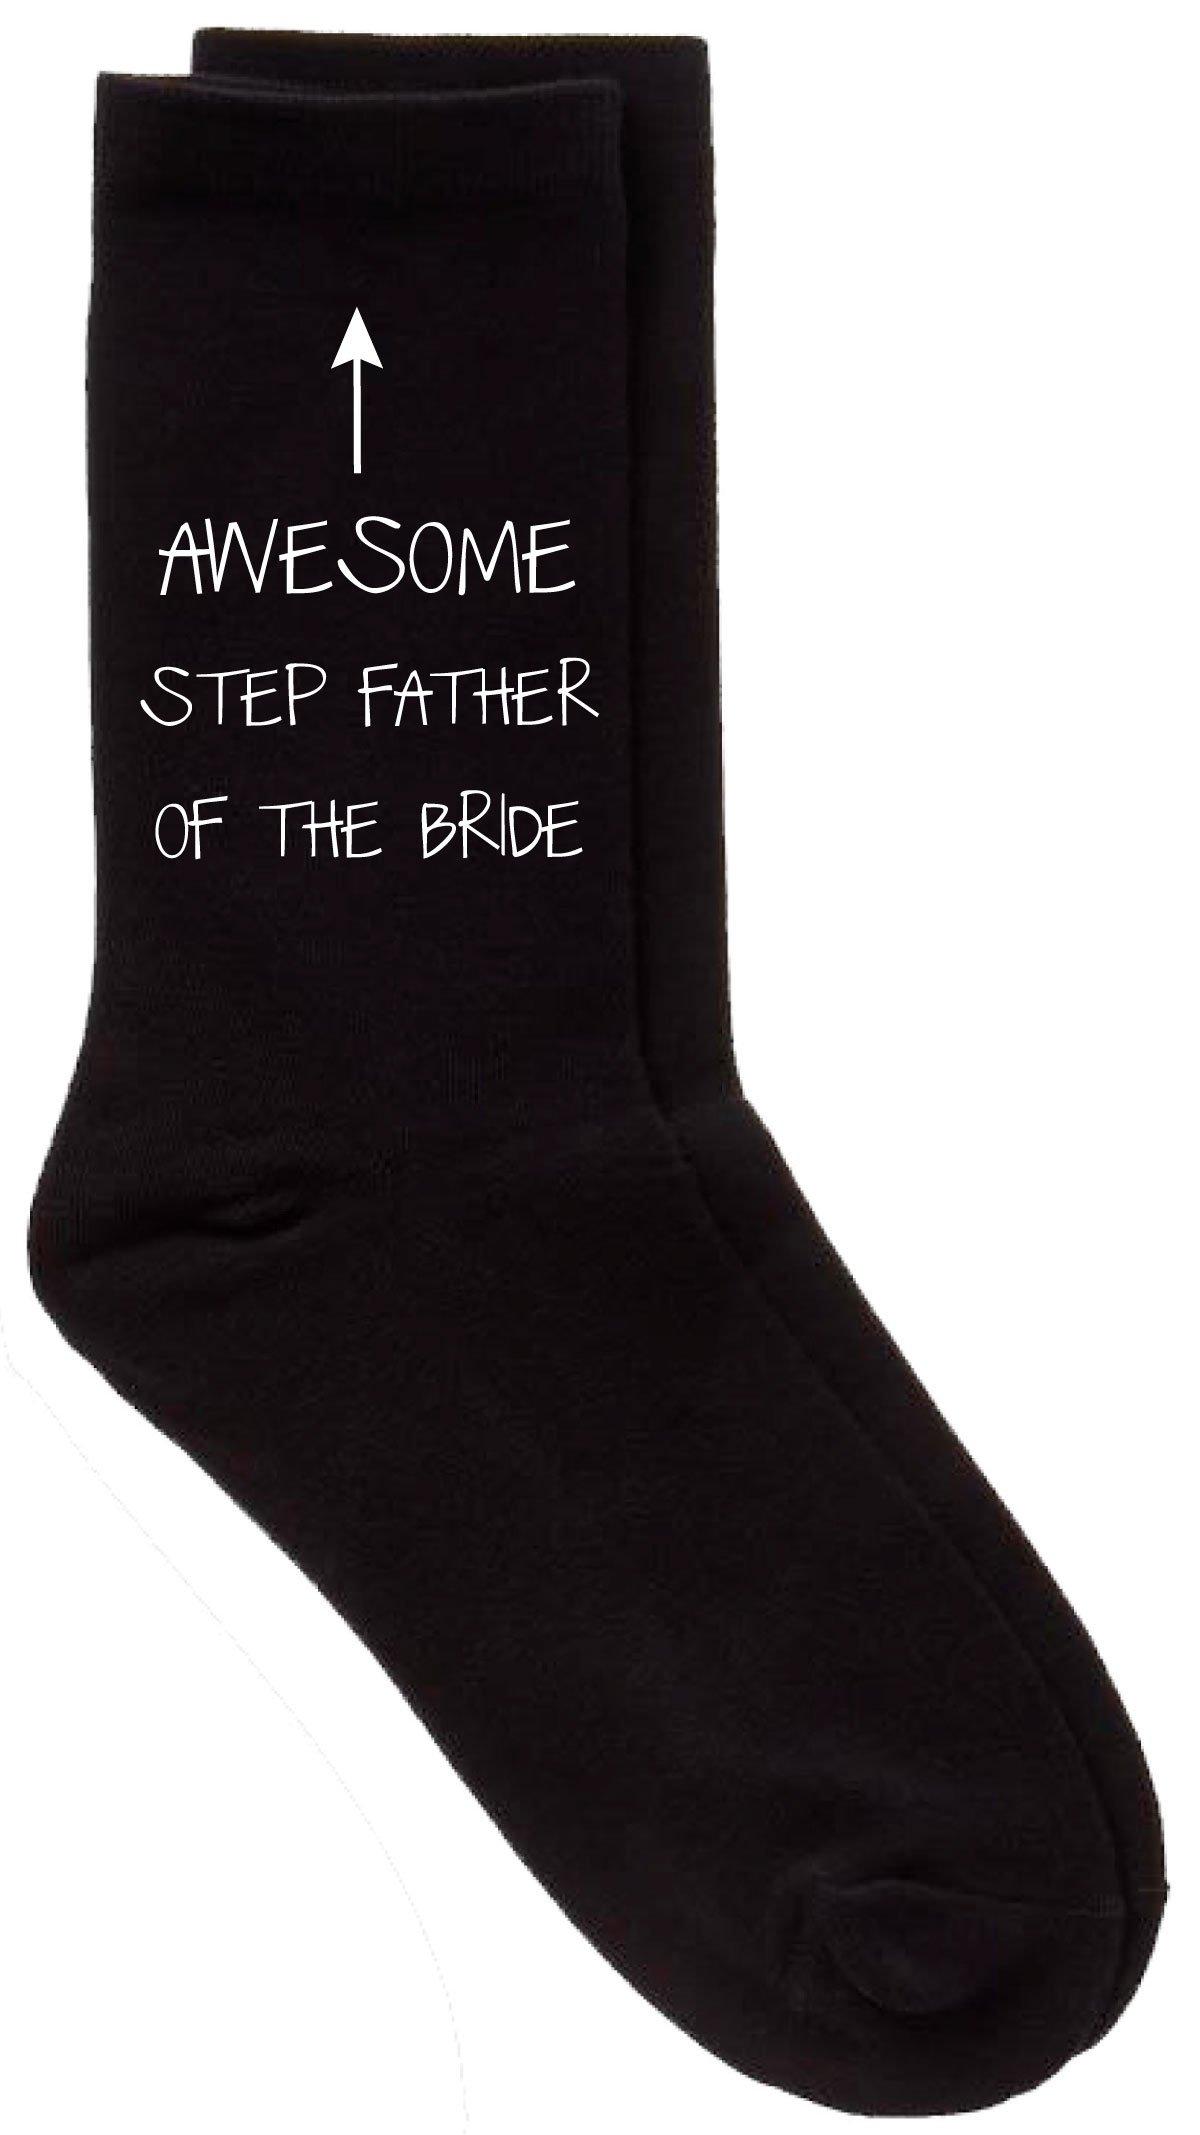 Awesome Step Father Of The Bride Black Calf Socks